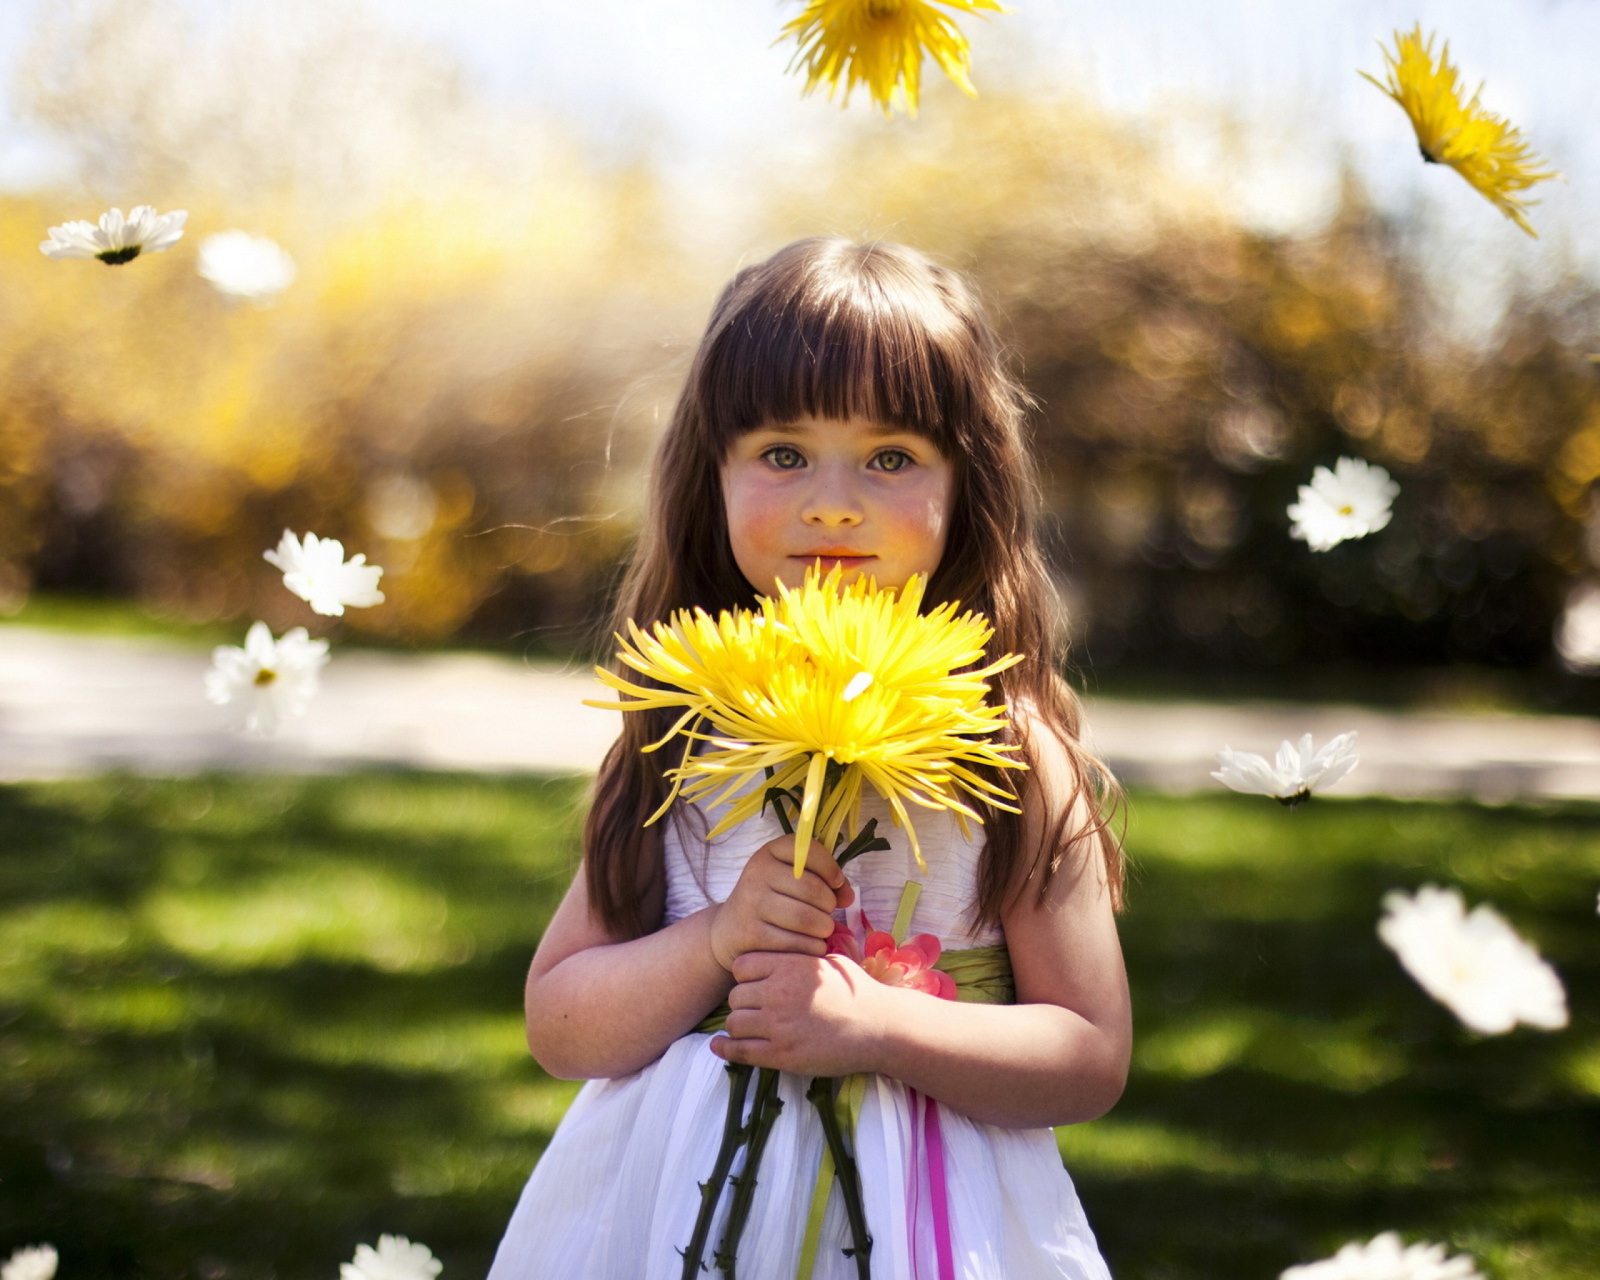 Sweet Child With Yellow Flower Bouquet wallpaper 1600x1280